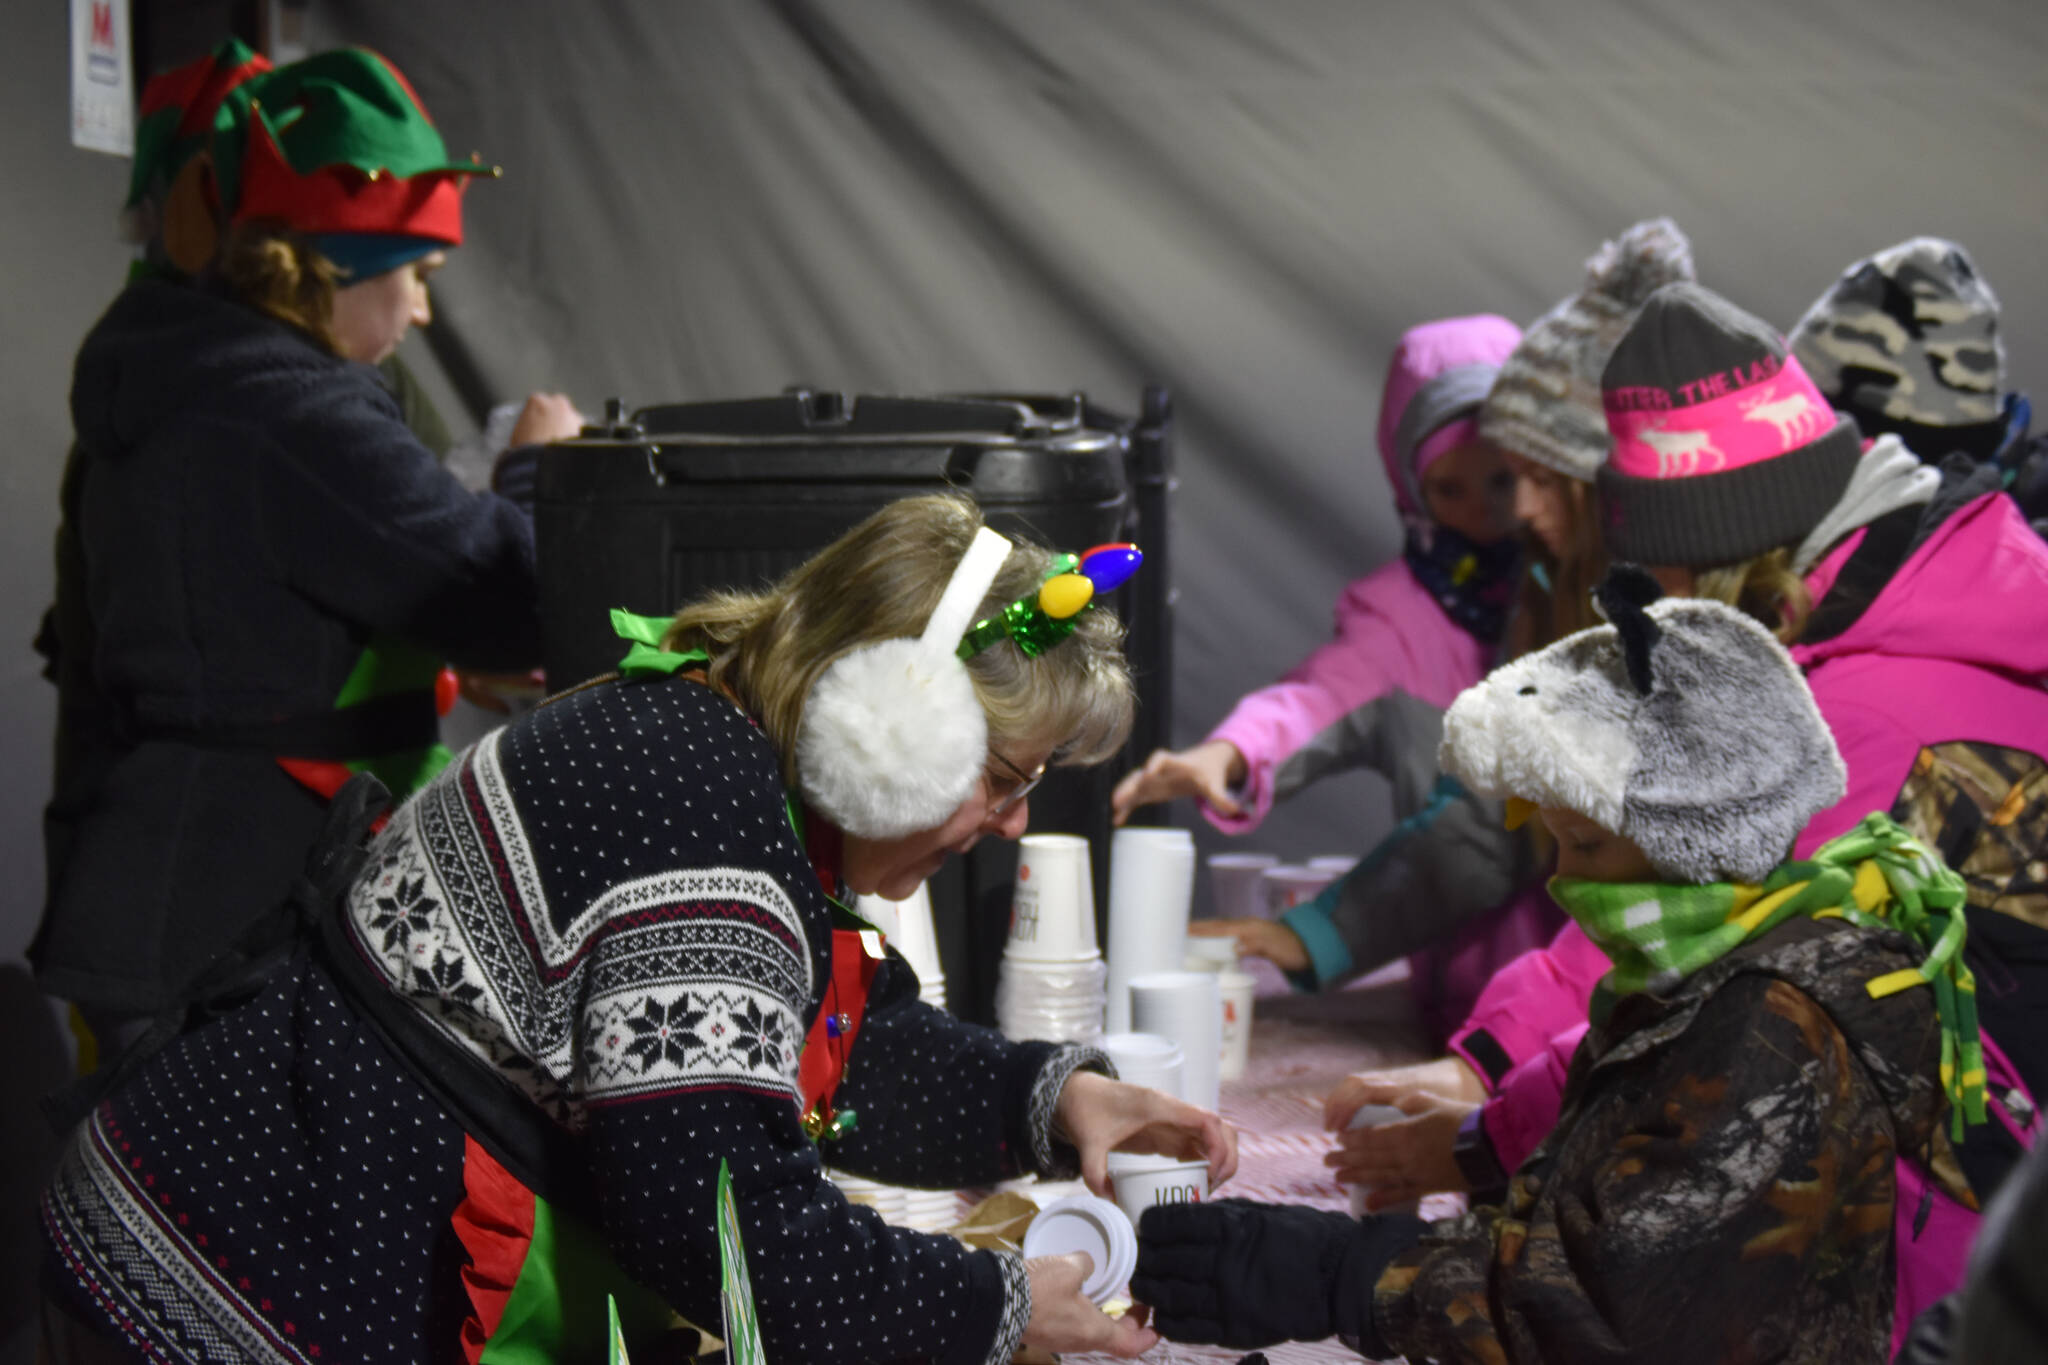 Donated coffee, hot chocolate and cookies are handed out to attendees of Christmas in the Park festivities on Saturday, Dec. 3, 2022, at Soldotna Creek Park in Soldotna, Alaska. (Jake Dye/Peninsula Clarion)